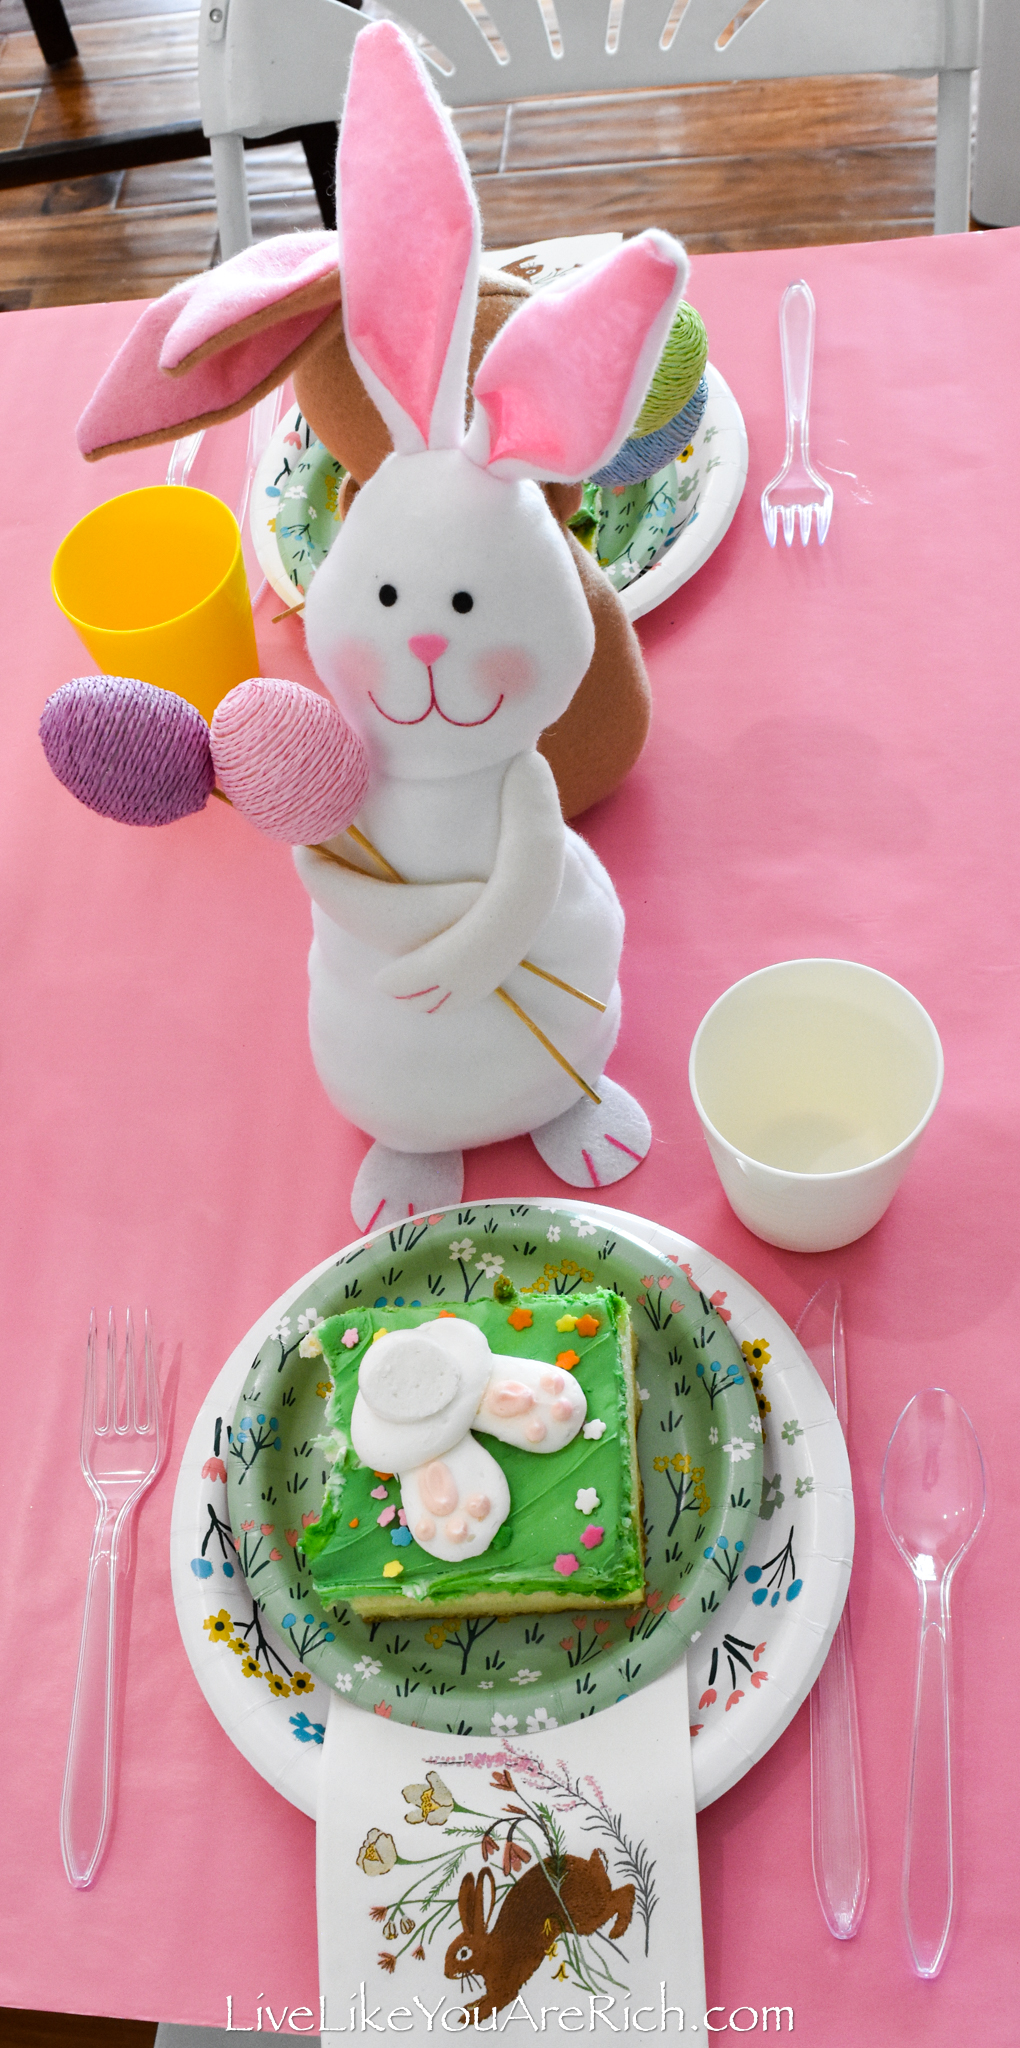 Kid's Easter Tablescape with bunny